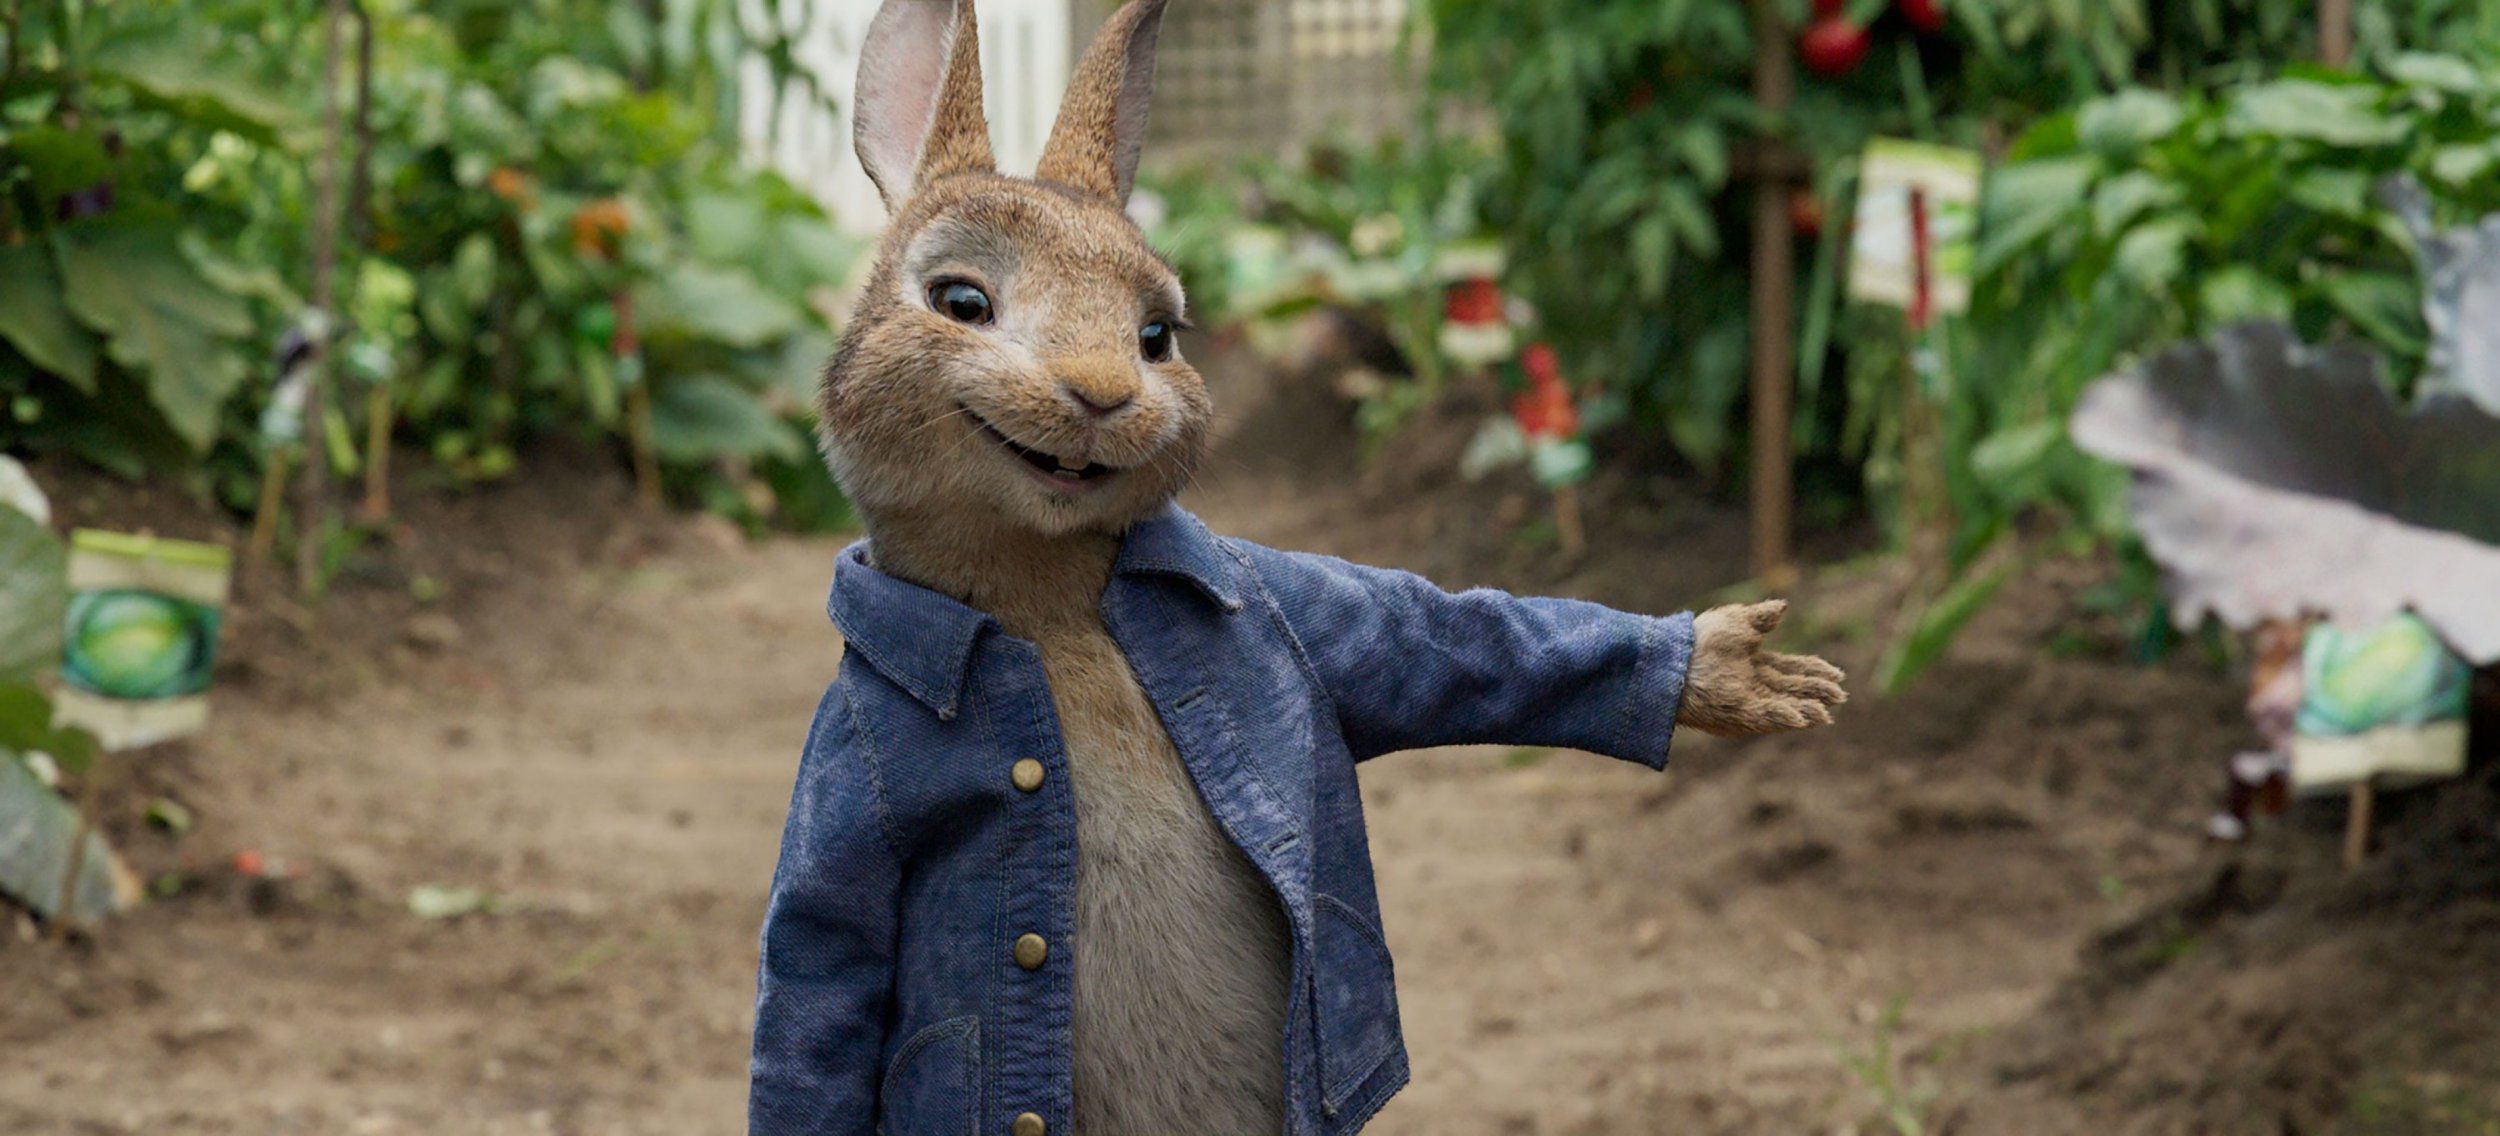 Peter Rabbit faces backlash after pelting allergy sufferer with ...